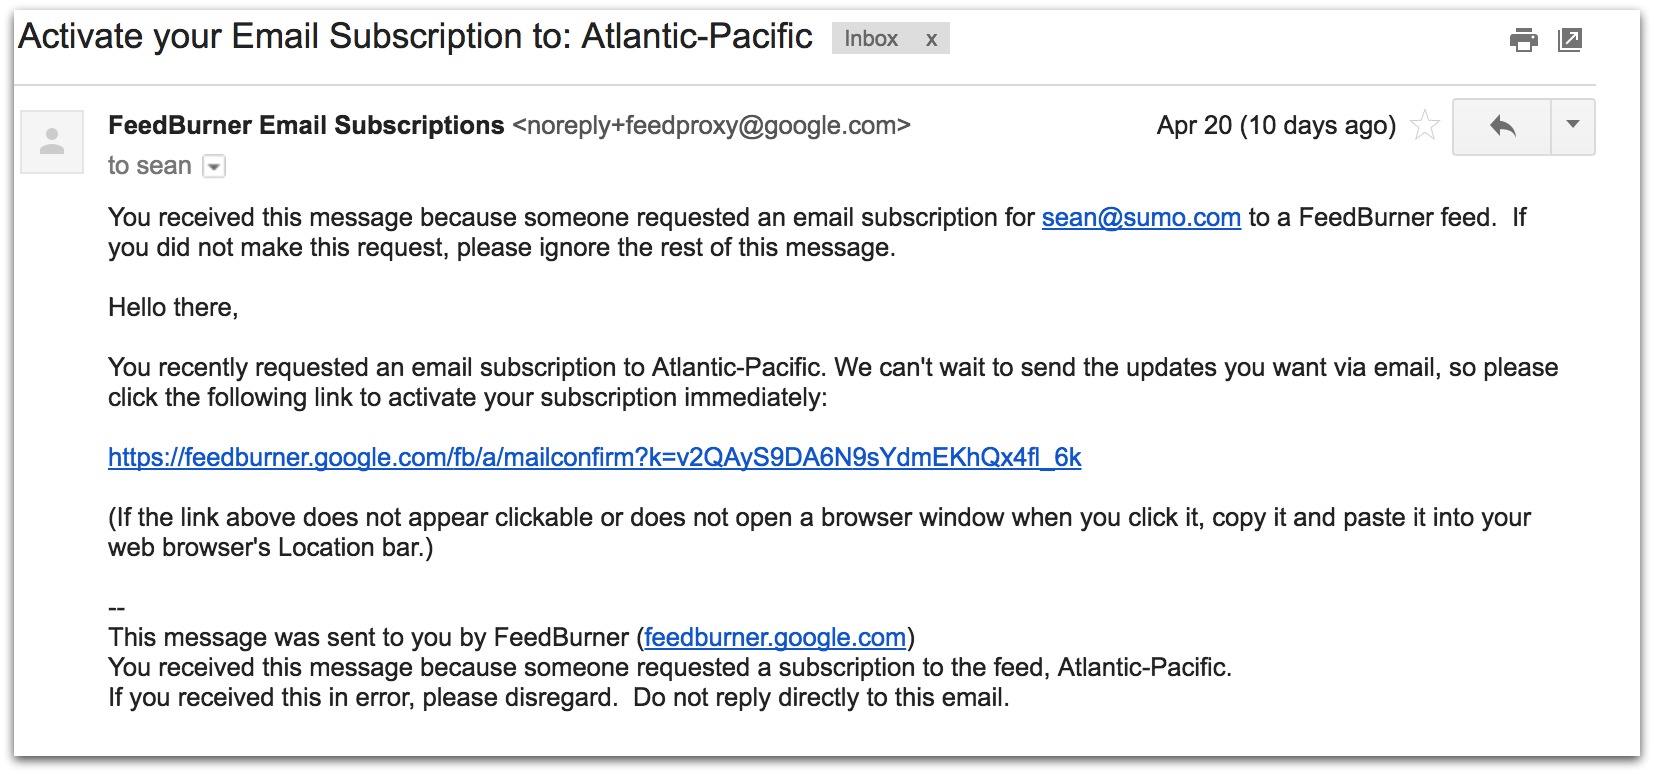 Screenshot showing a double opt-in email sent by Atlantic-Pacific